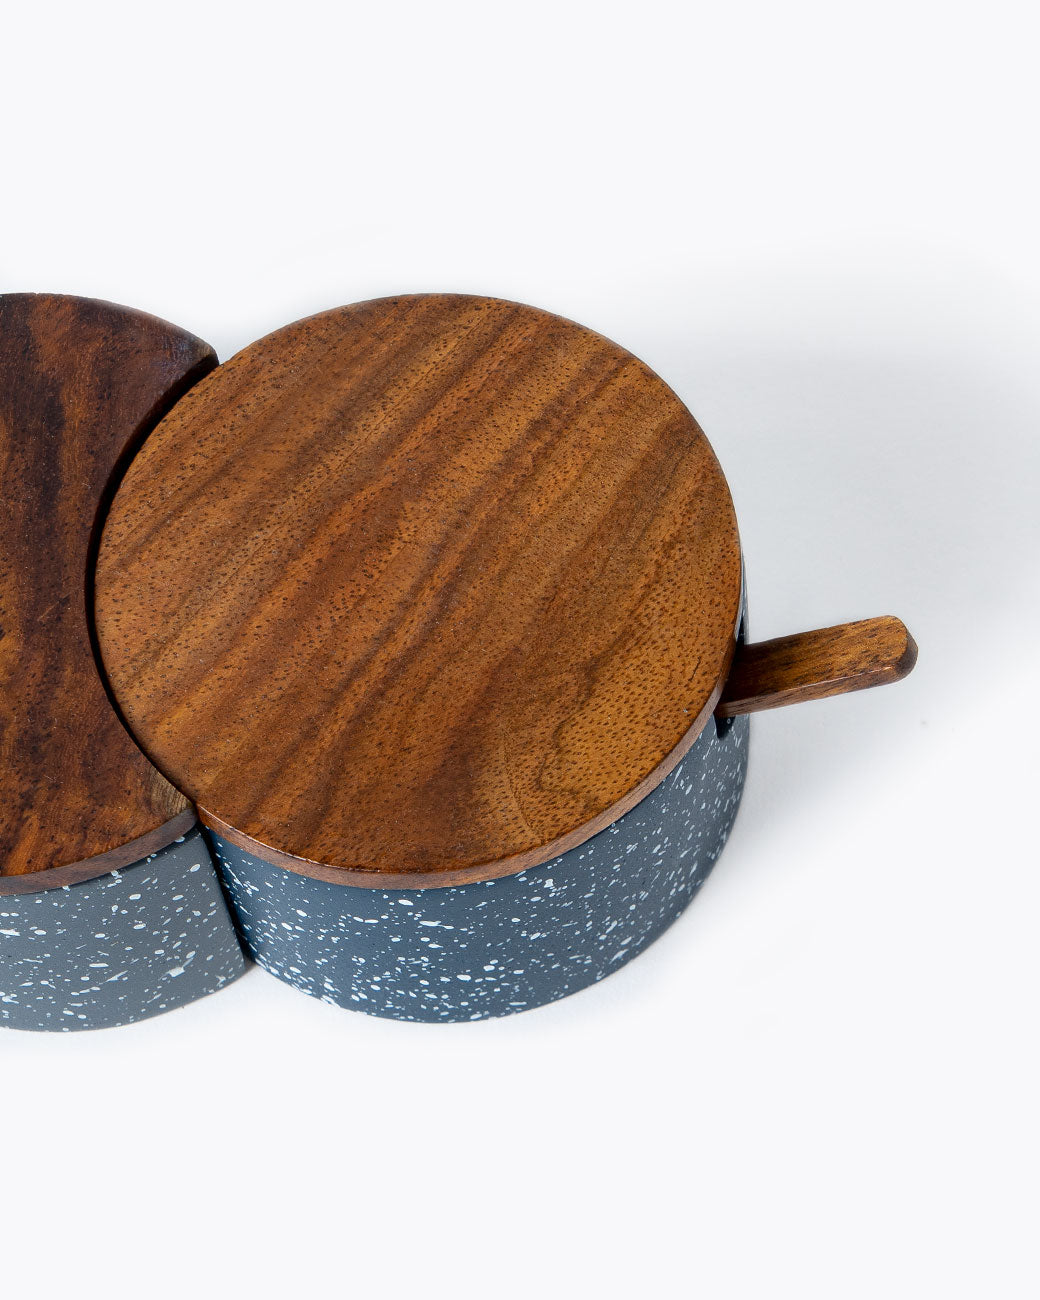 Interlocking circular salt cellar made of speckled blue and gray cement with wood lid and spoon, shown from the top.